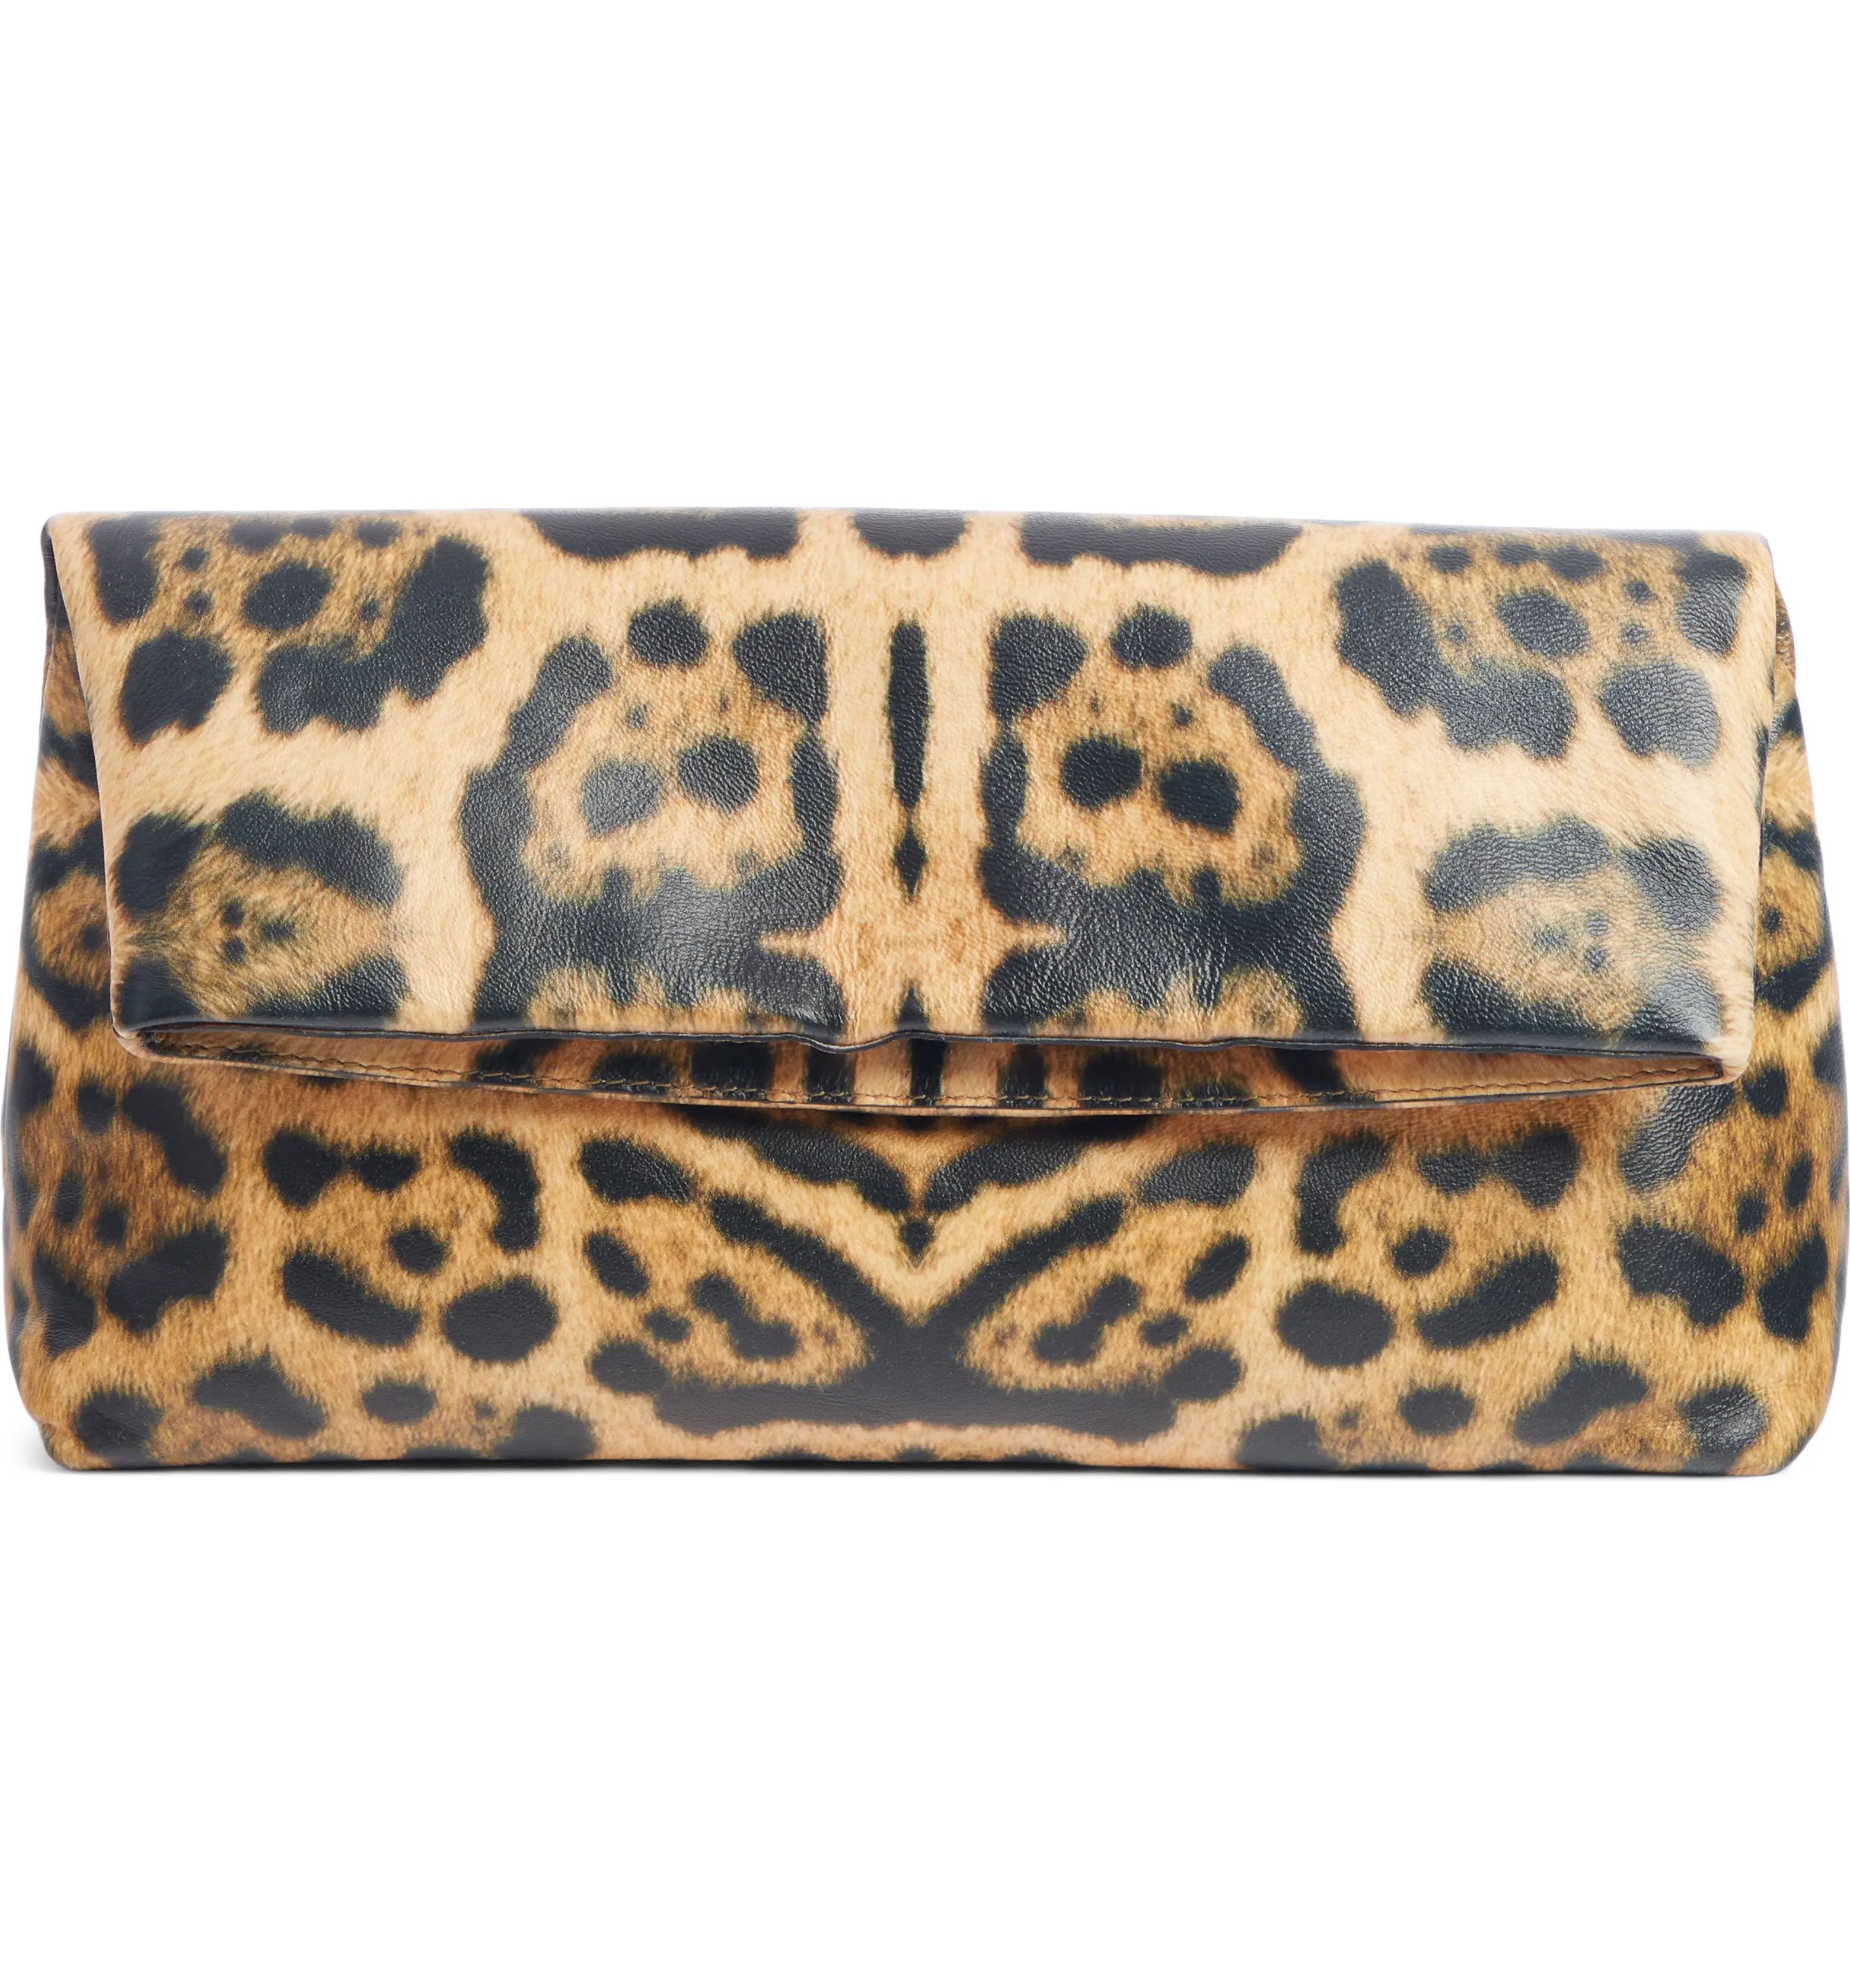 Oversize Leopard Print Leather Pouch | Nordstrom